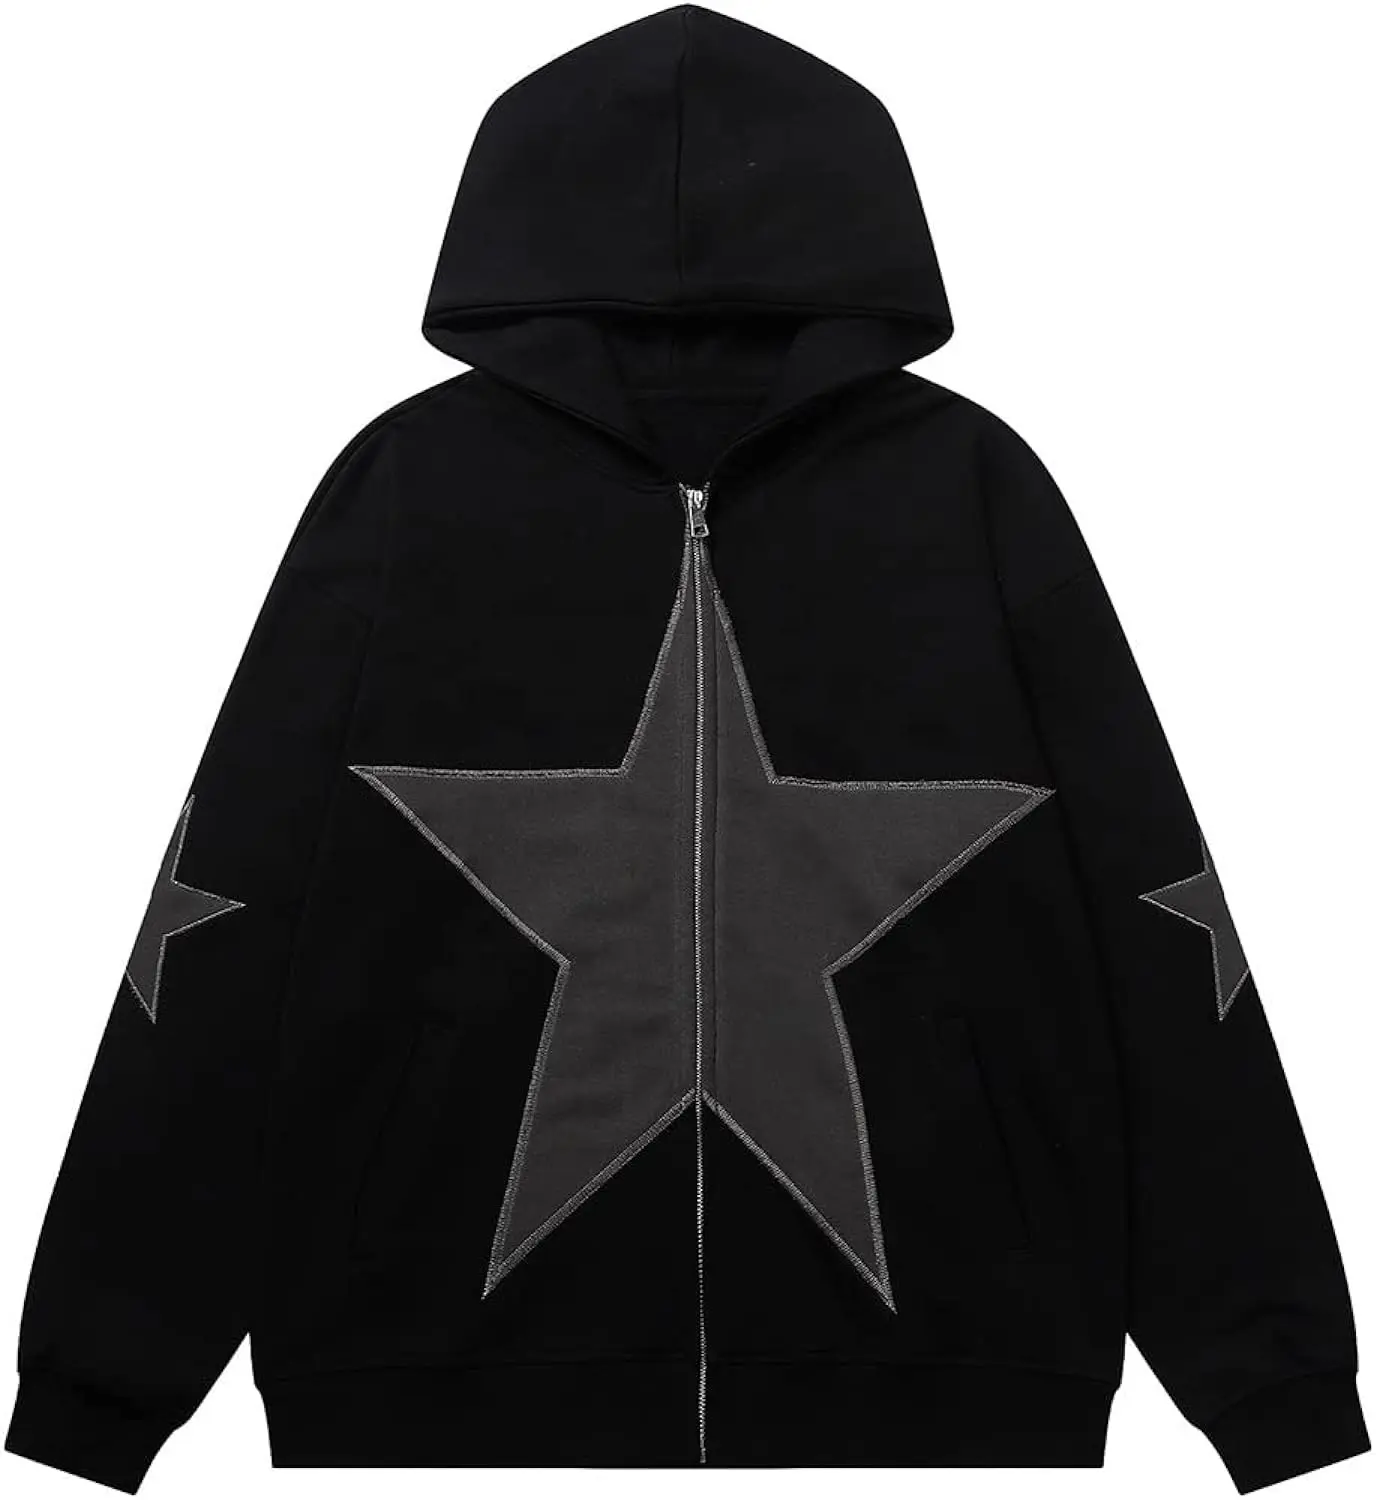 Black hoodie with a star on the front new design fashionable star hoodie embroidered hooded sweatshirts Star patch hoodie